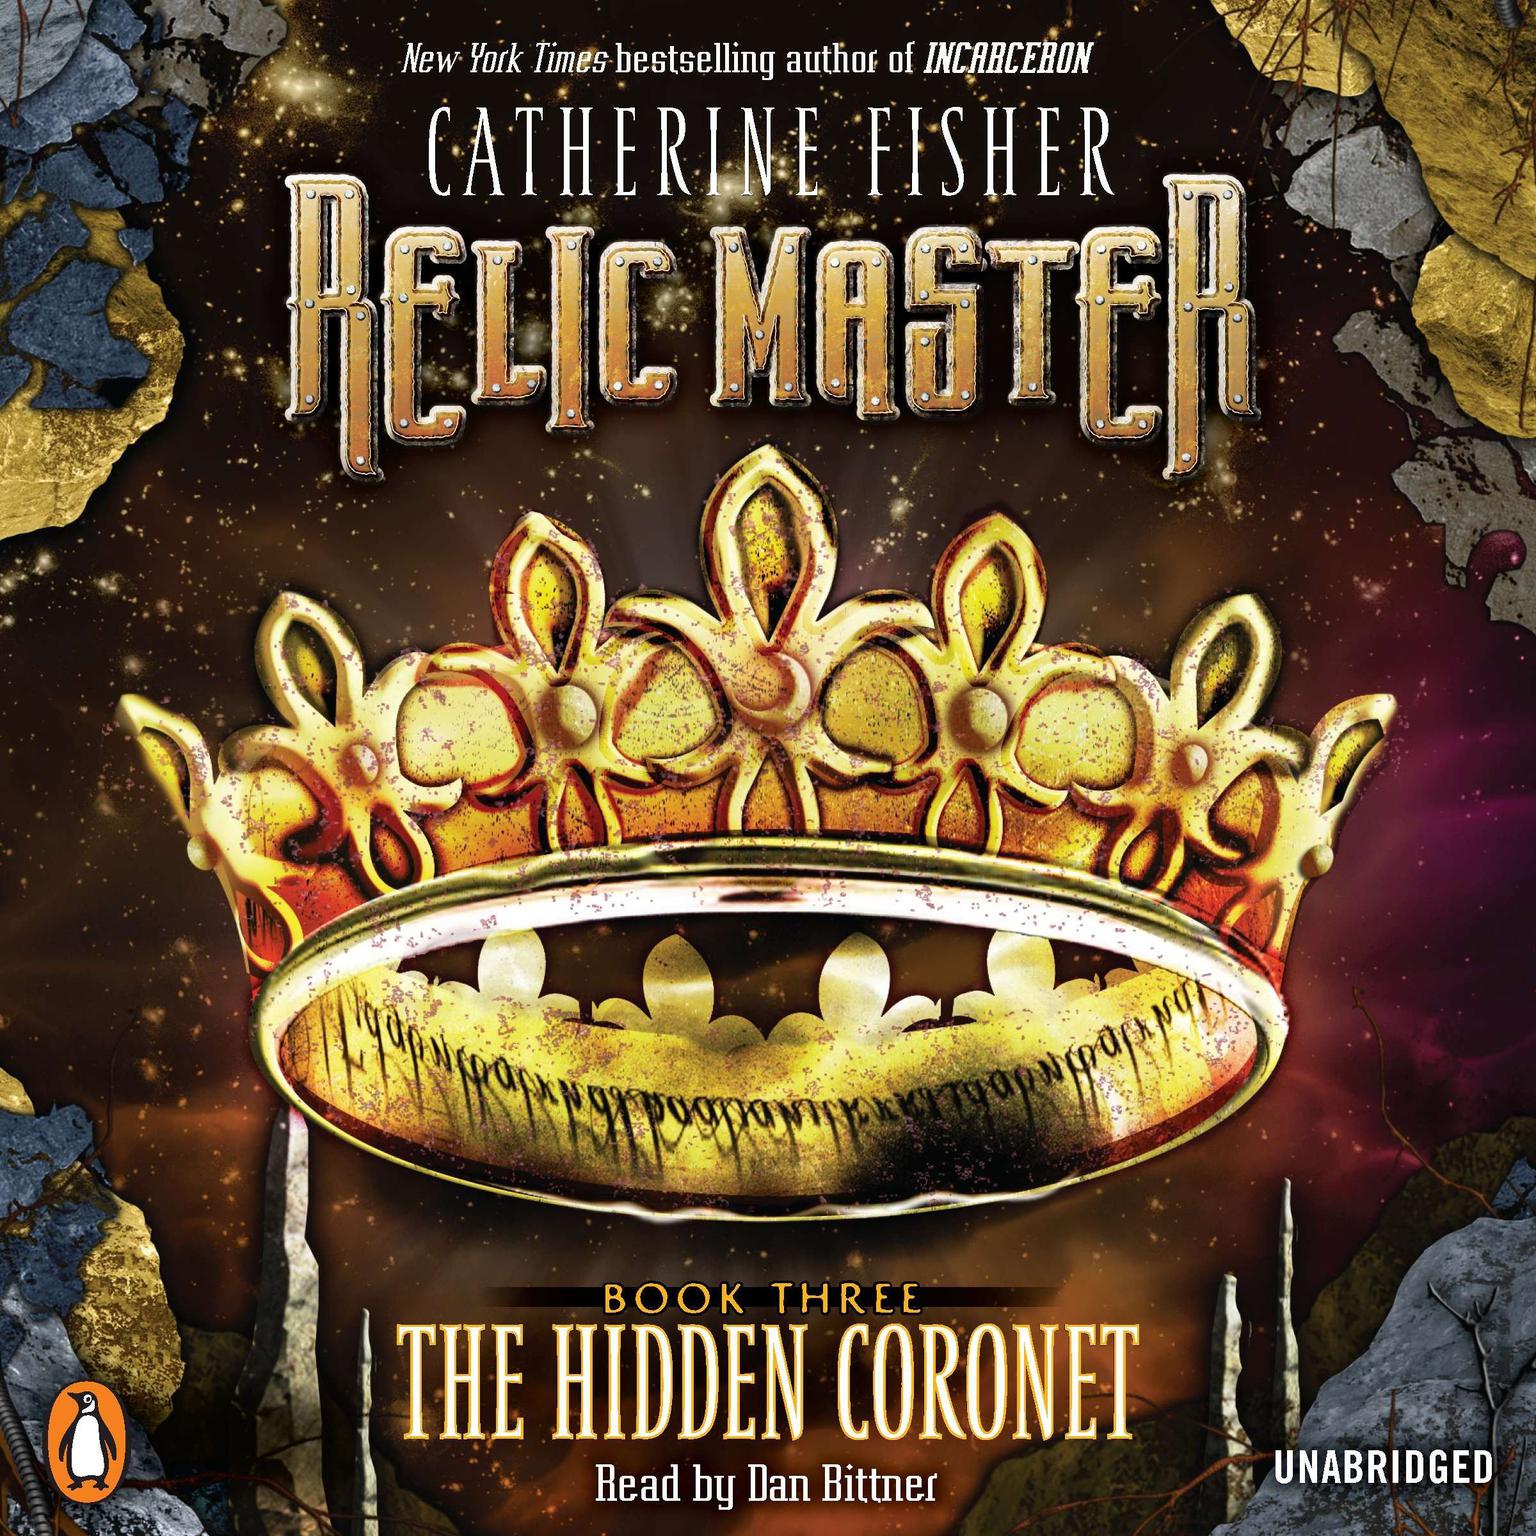 Relic Master: the Hidden Coronet Audiobook, by Catherine Fisher